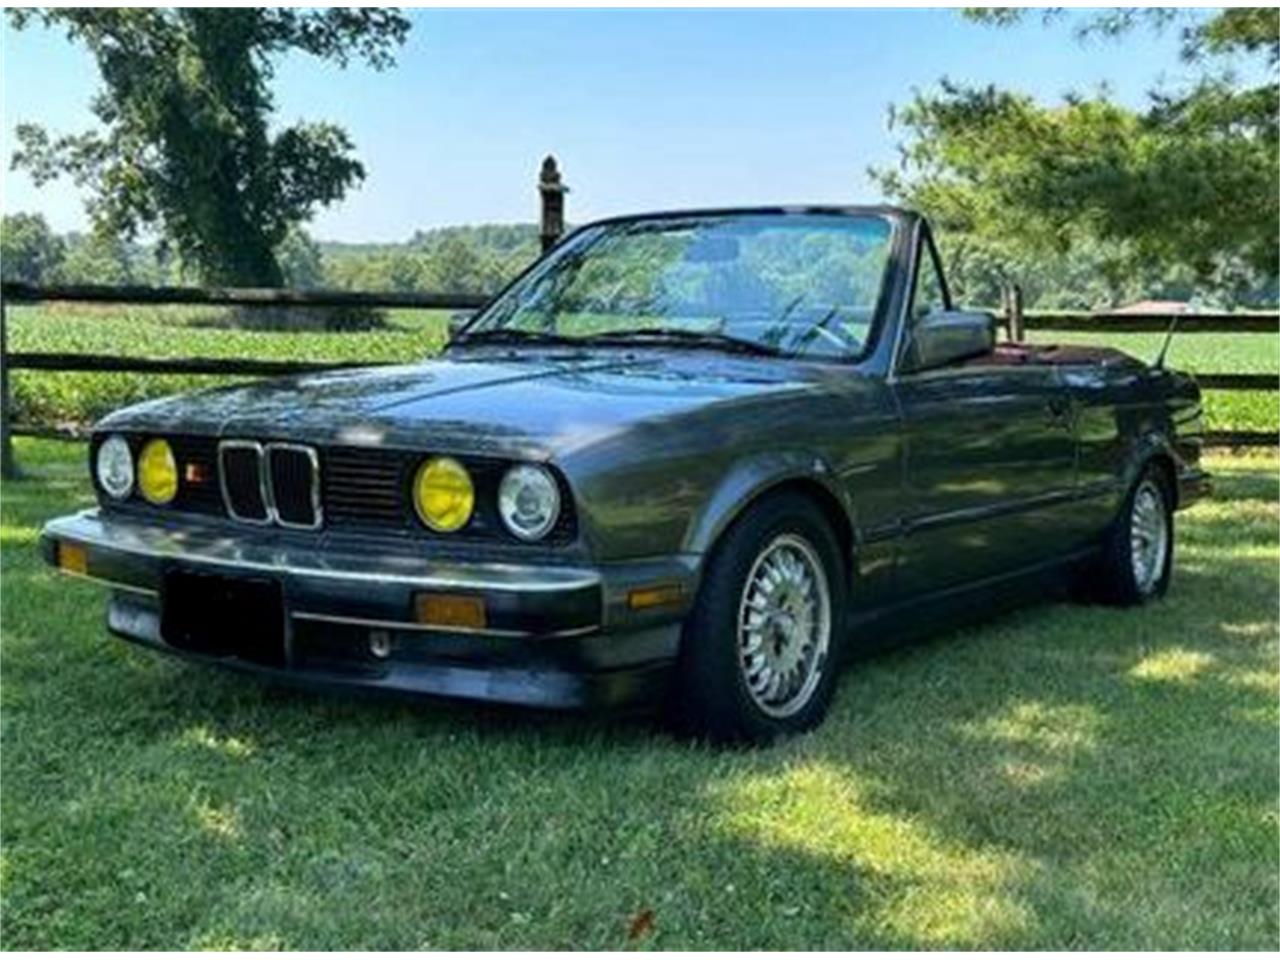 For Sale: 1987 BMW 325 in Cadillac, Michigan for sale in Cadillac, MI